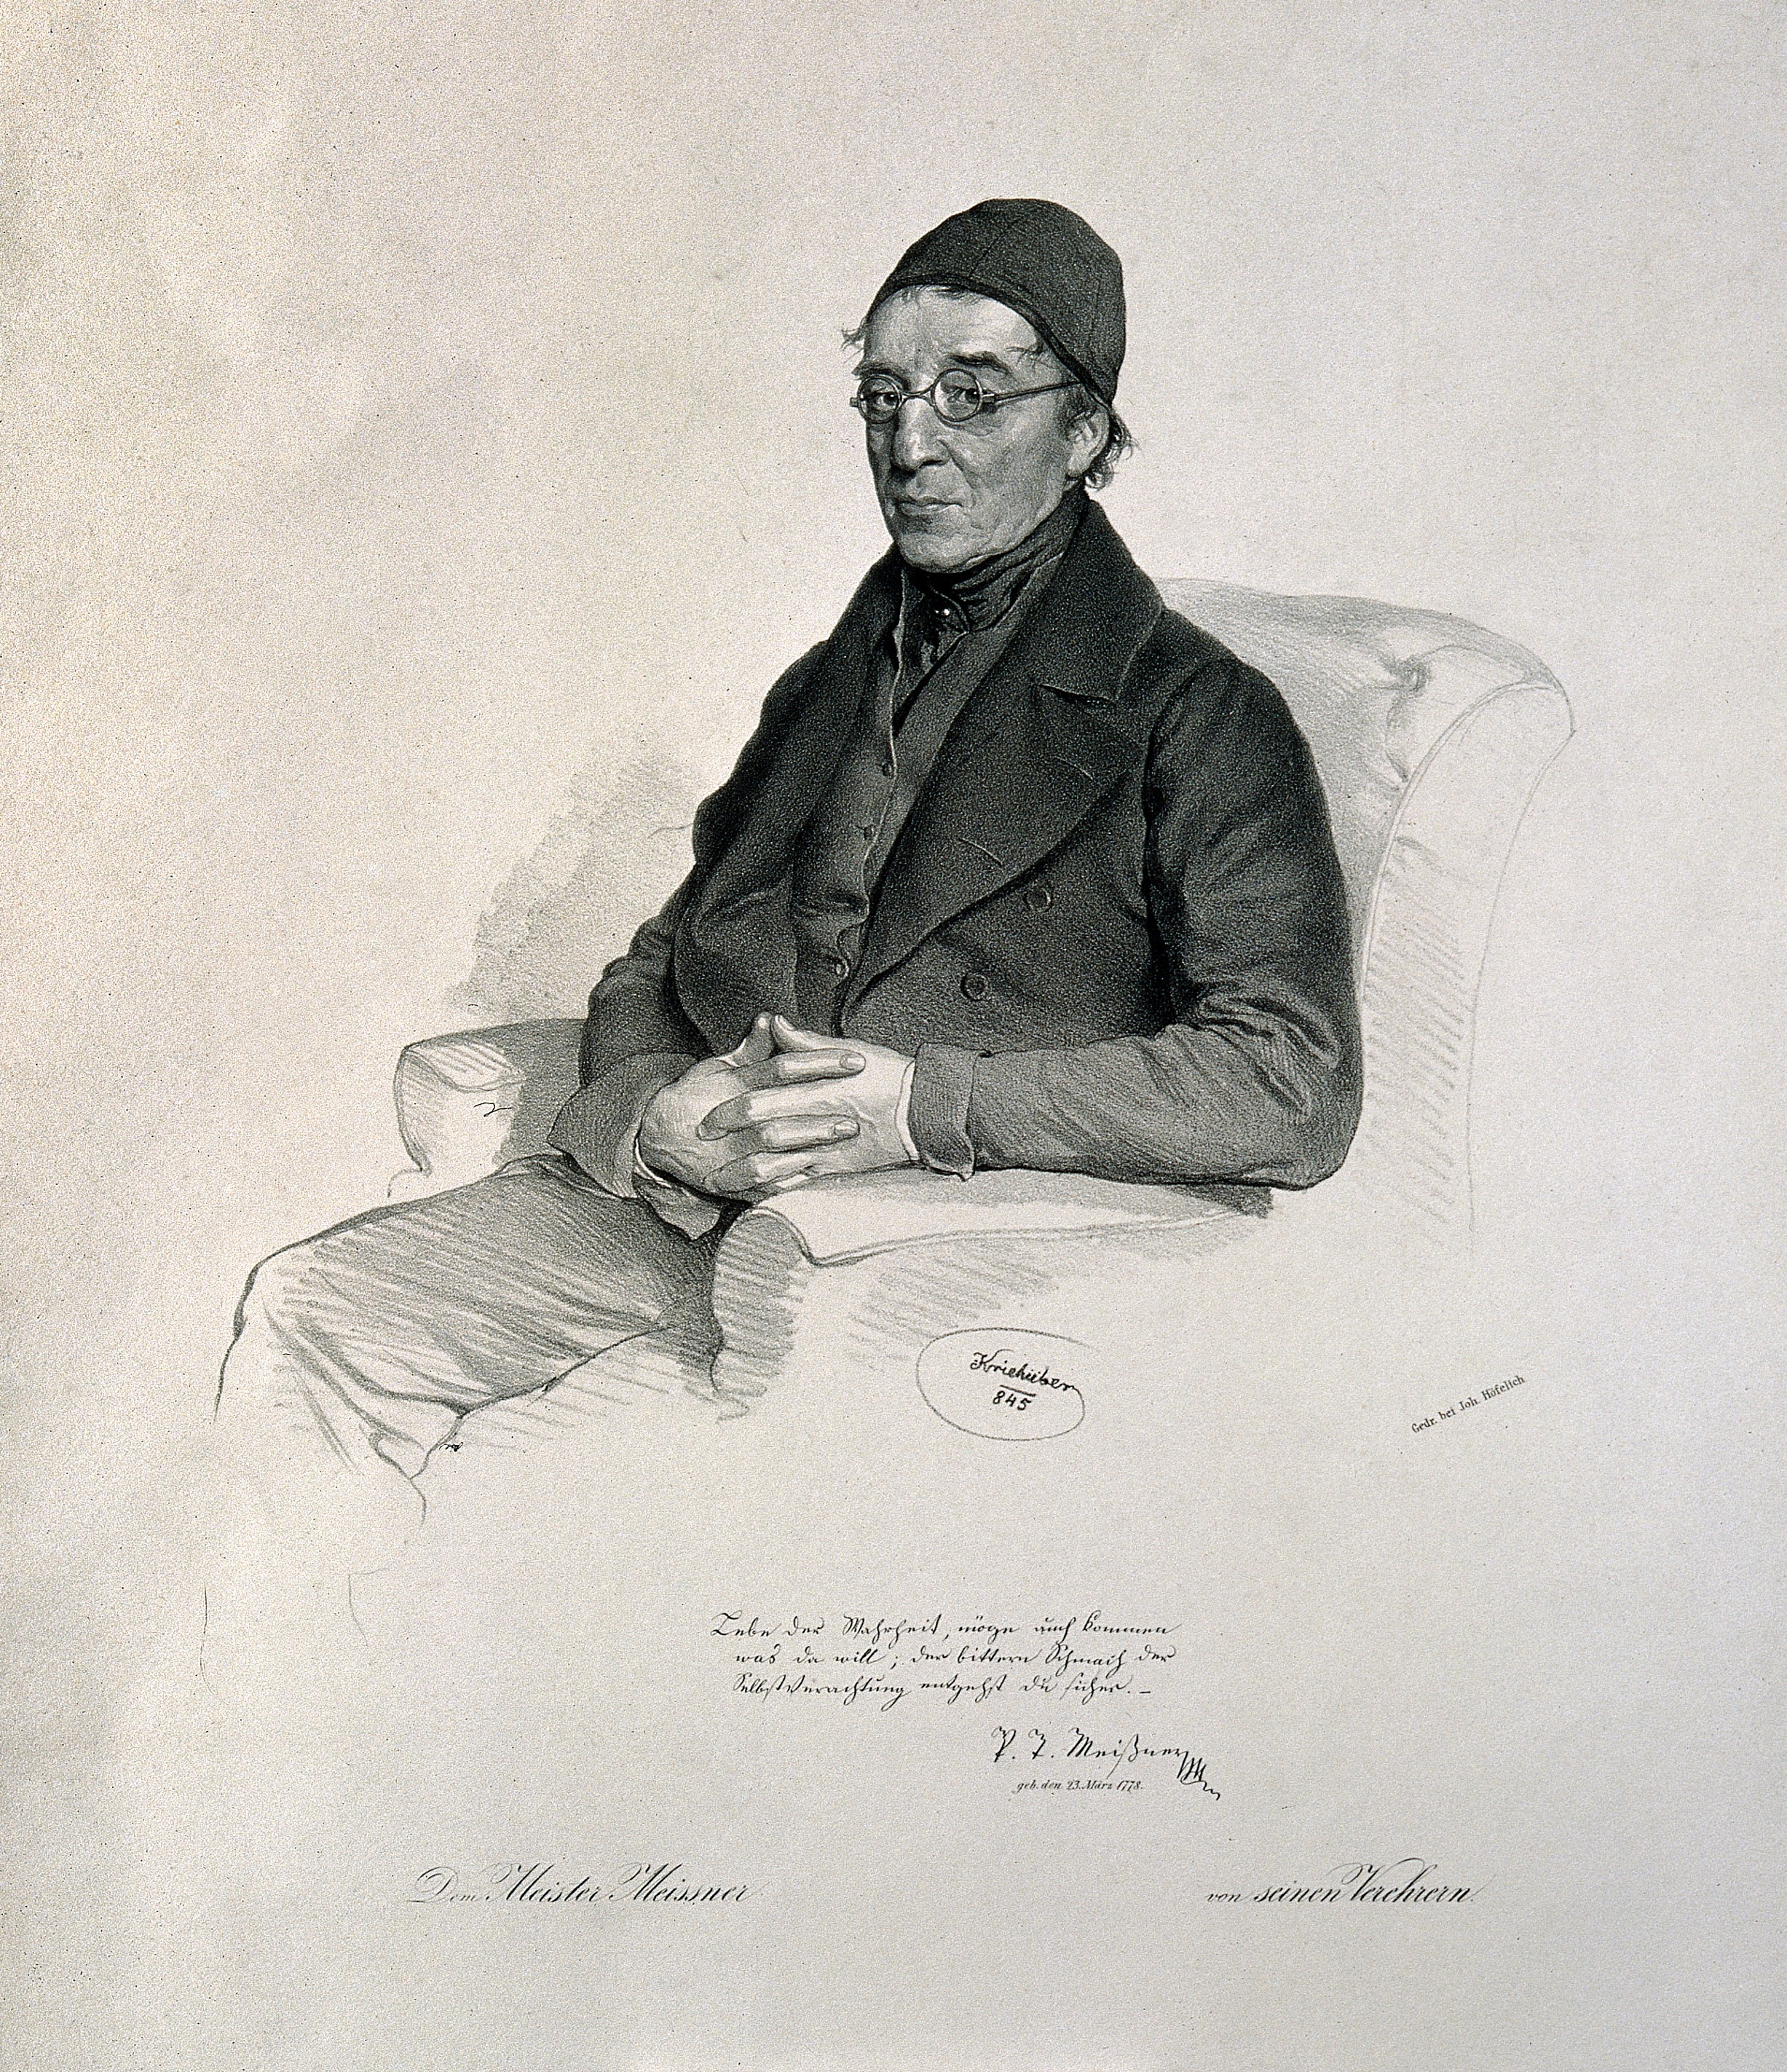 Paul Traugott Meissner. Lithograph by J. Kriehuber, 1845. Wellcome V0003967